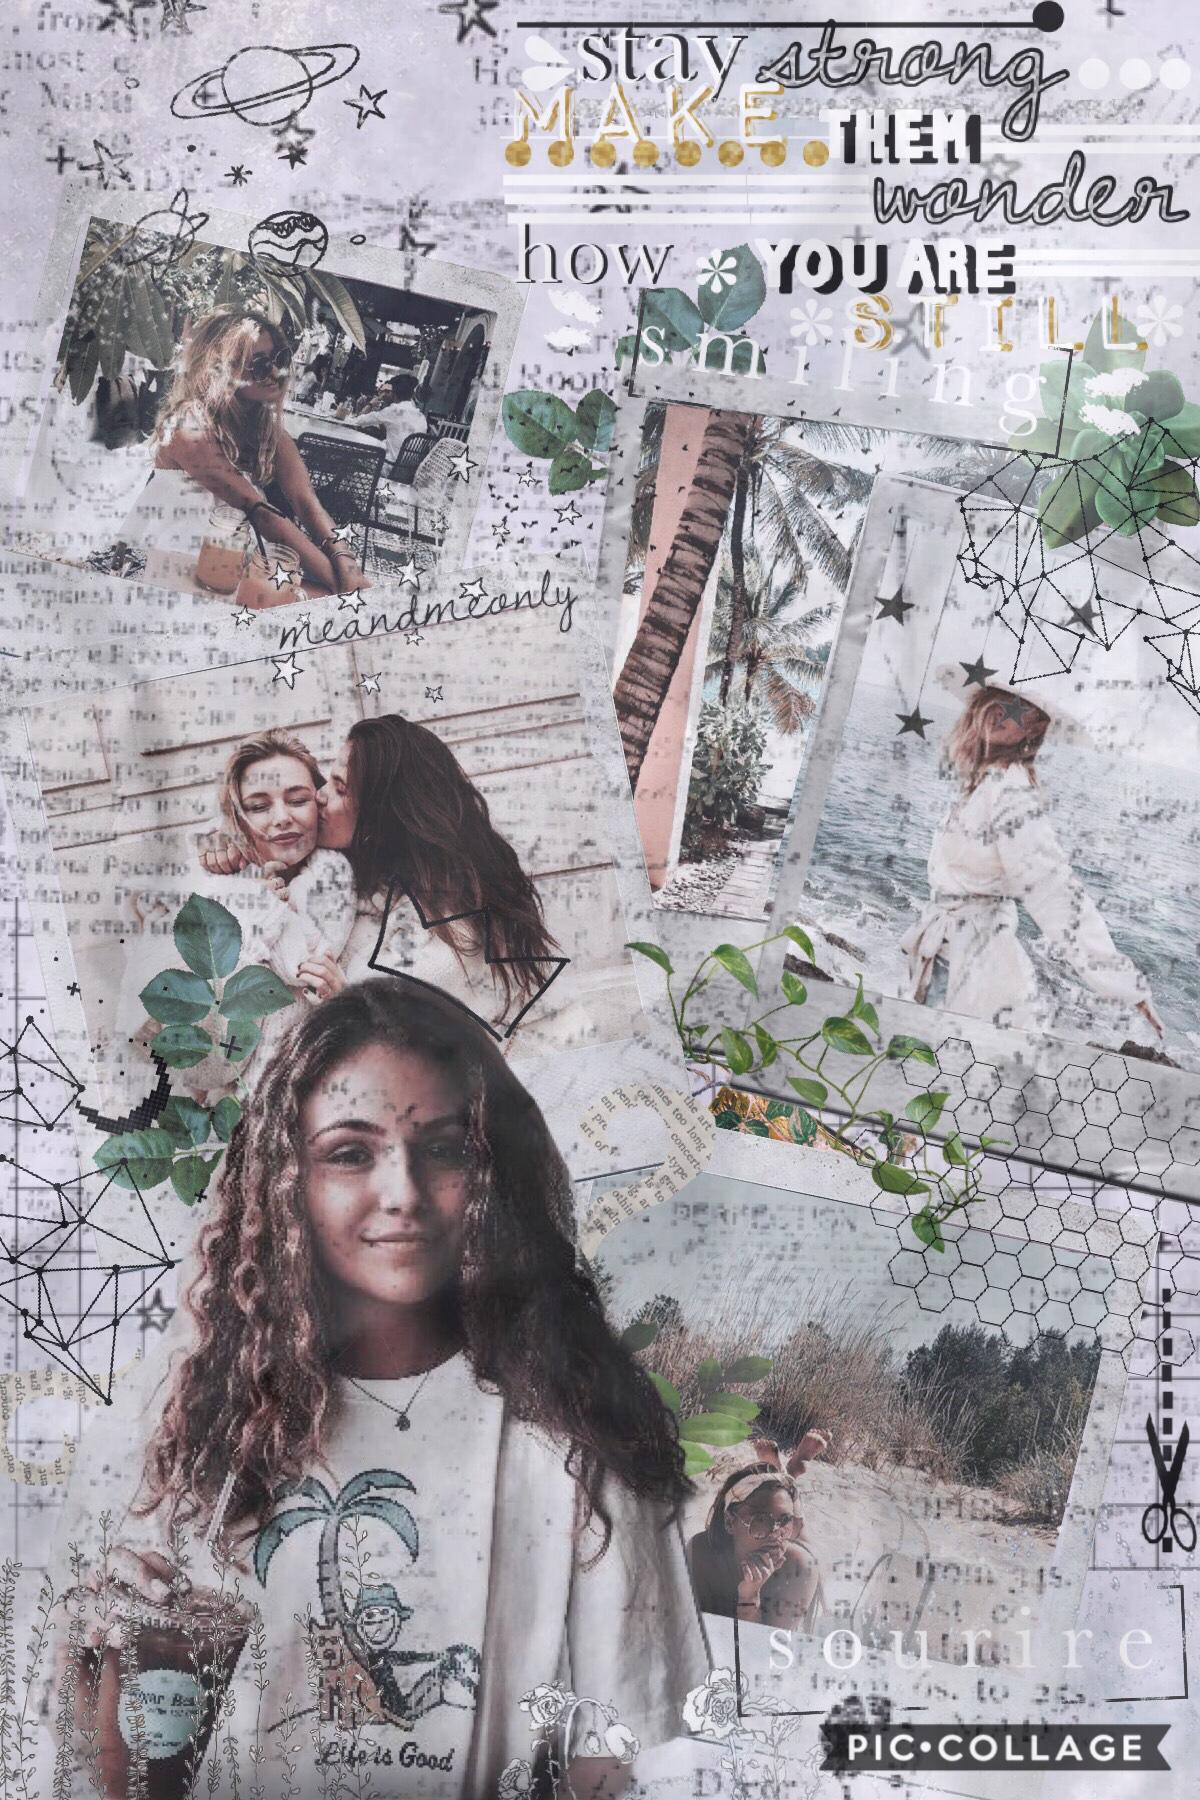 holaaa! sorry I haven’t posted in while, schools keeping me really busy :( how’s everyone’s day? ❤️ QOTD: anyone know what sourire mean? (it’s on the bottom right corner of the collage?
AOTD: I’m asking you!!💓☺️